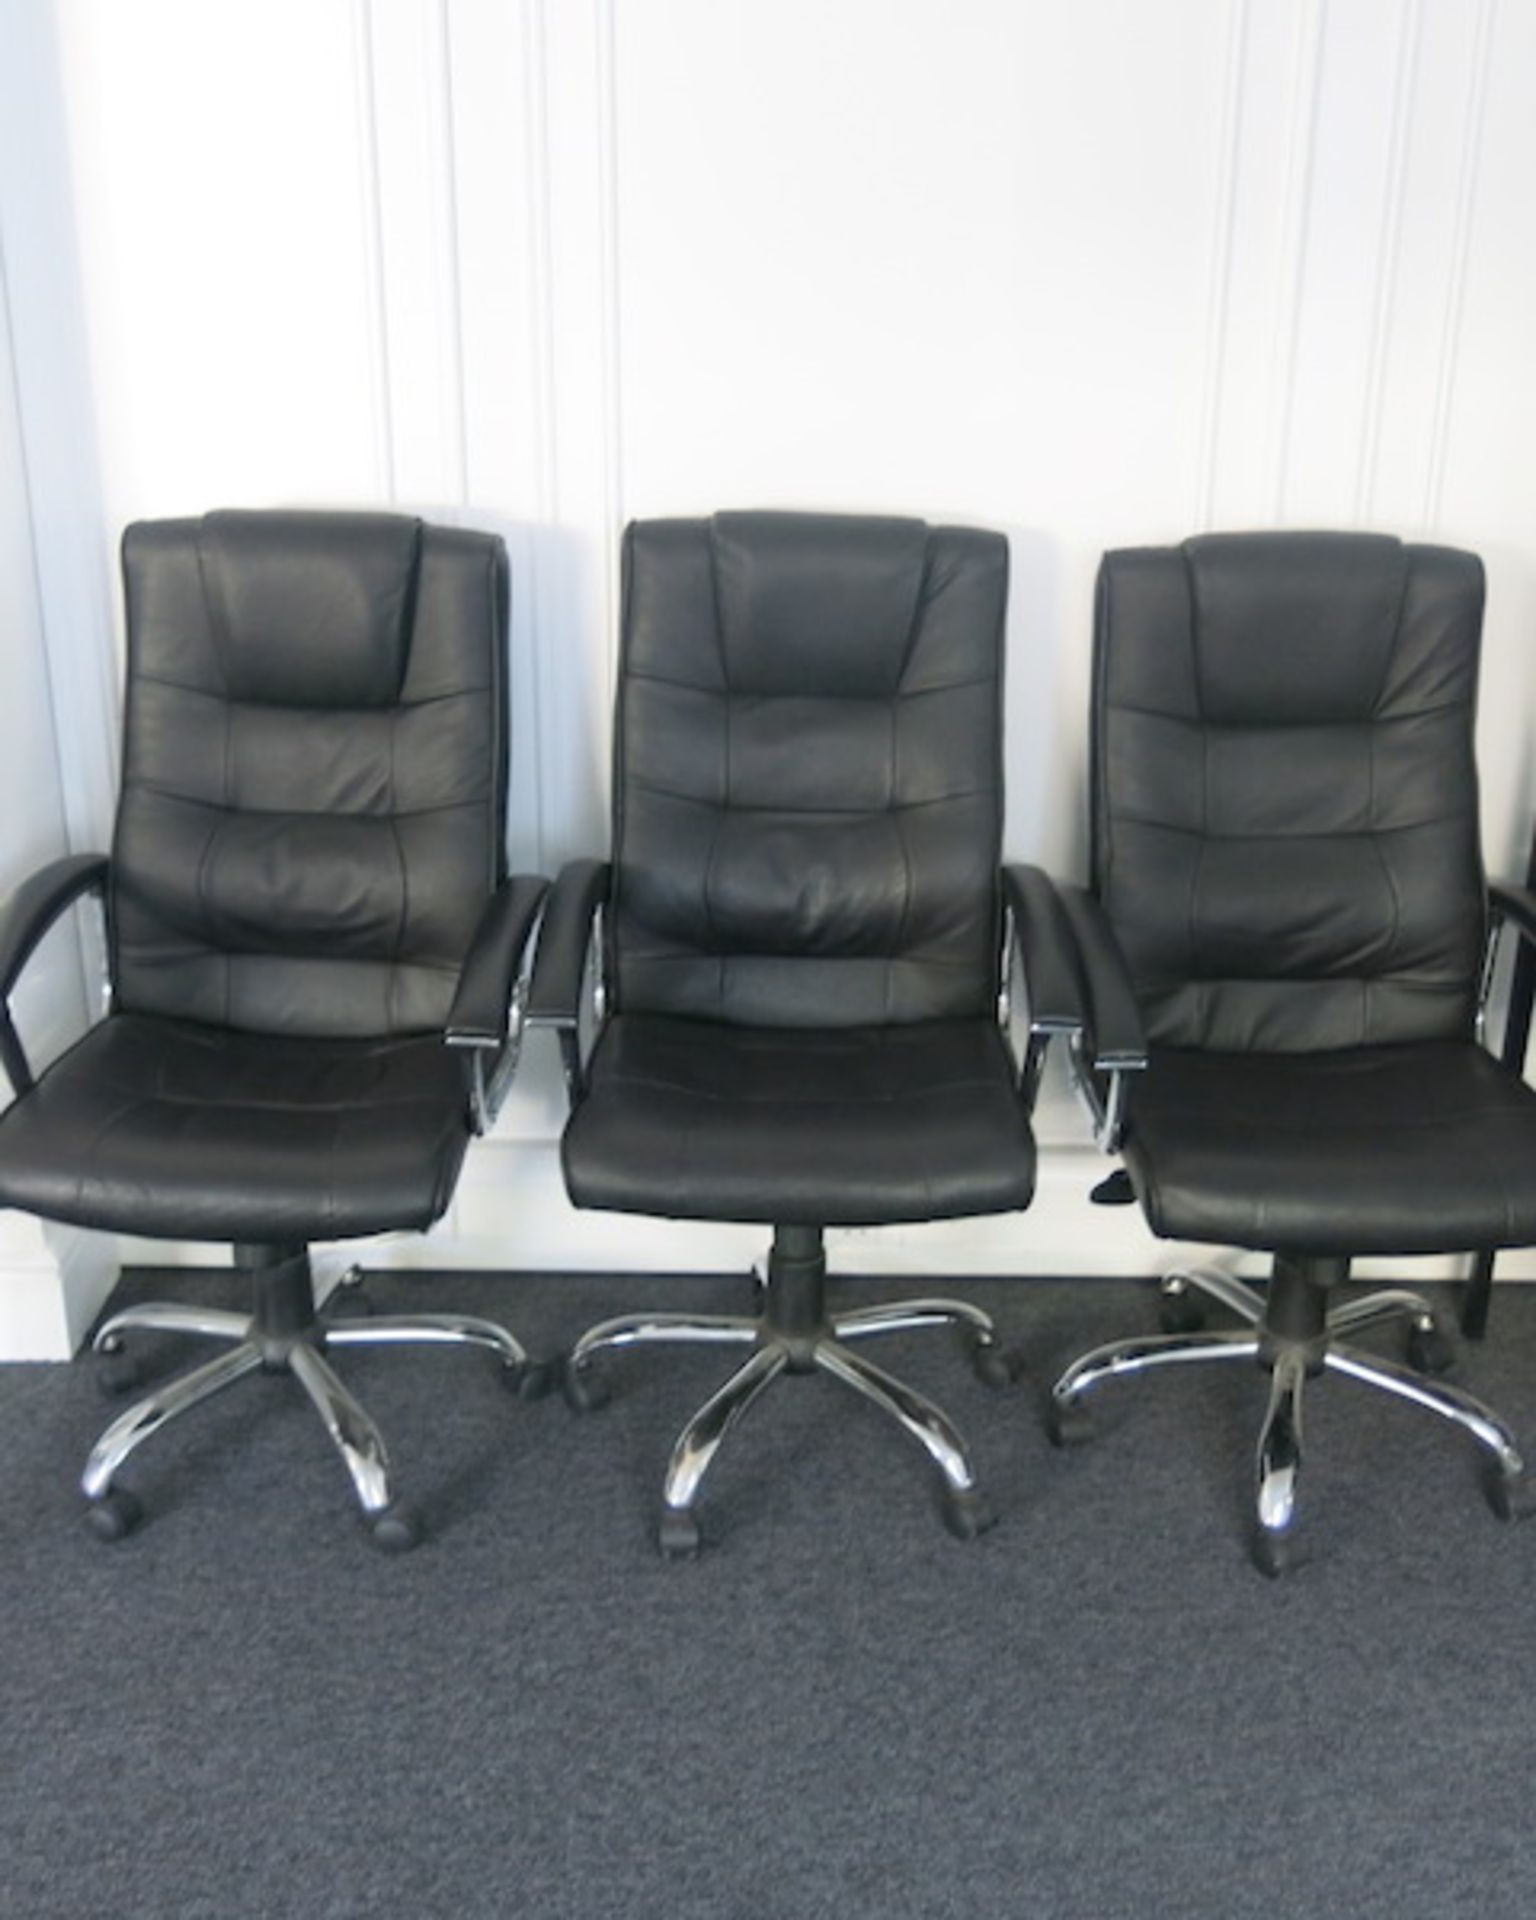 3 x Black Faux Leather Executive Office Swivel Chairs